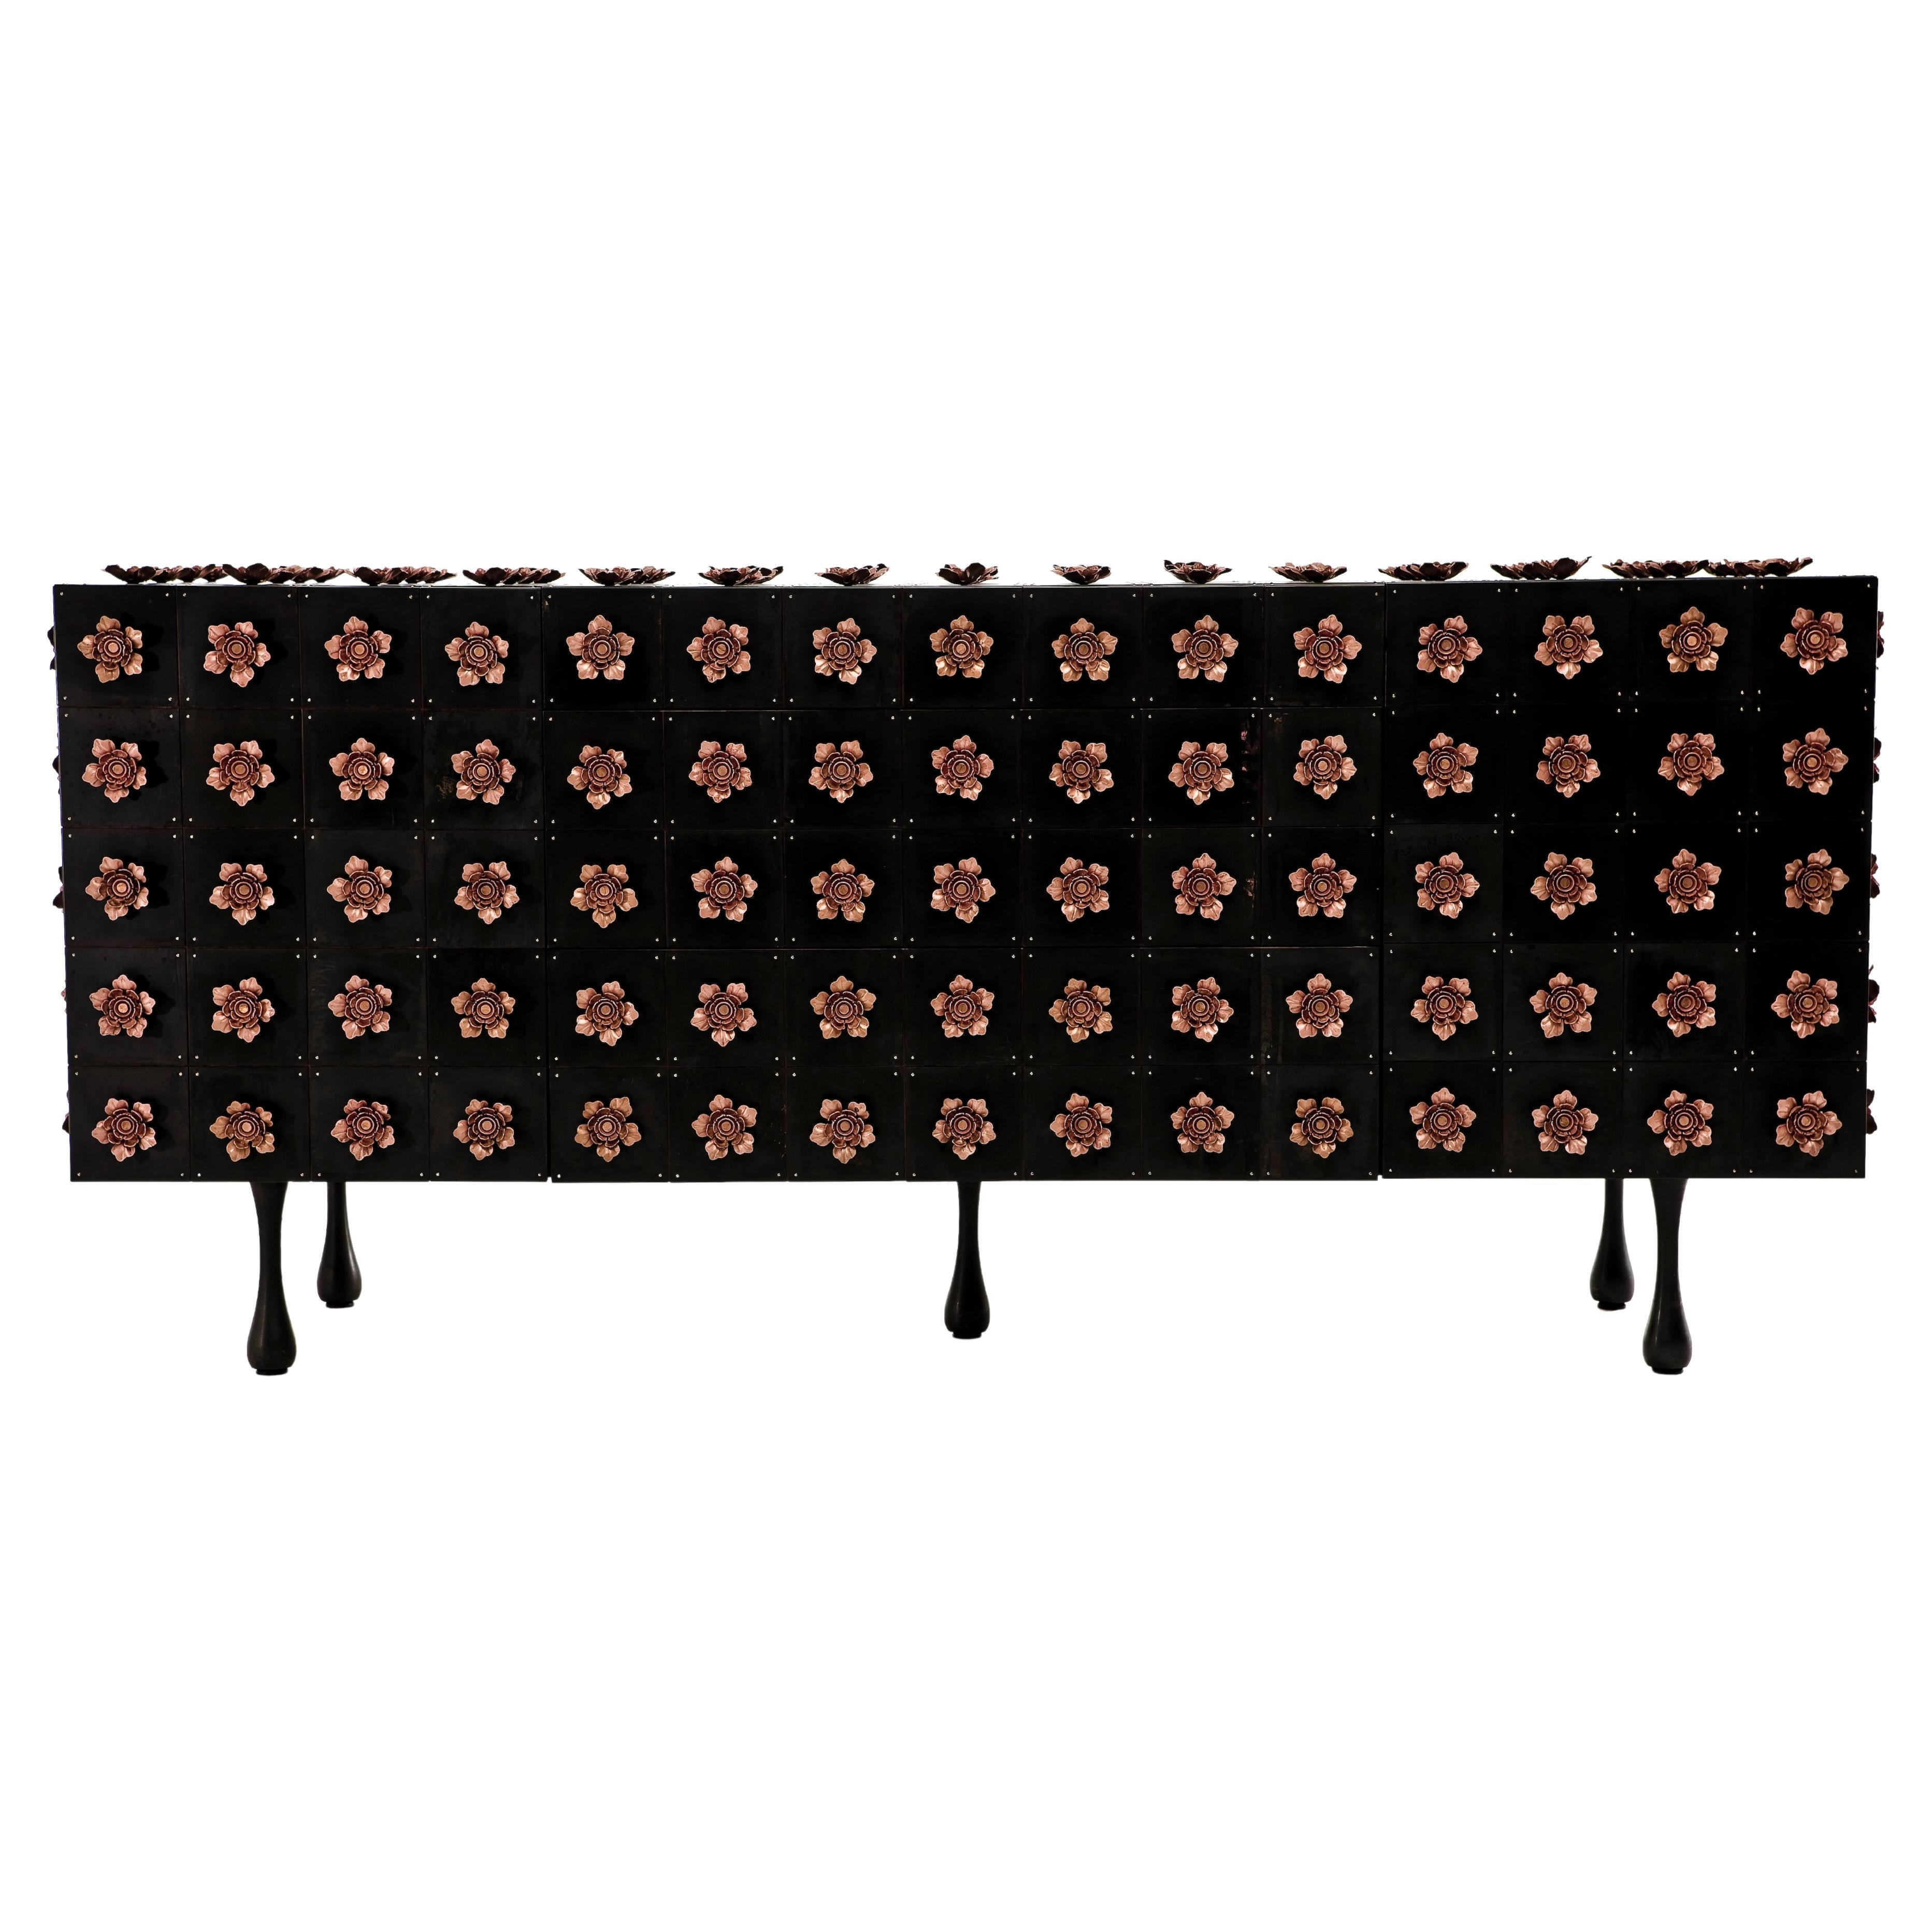 The Rosette sideboard belongs to the Rosette collection designed by Egg Designs and manufactured in South Africa.
This high end, contemporary and bespoke server is covered with a riot of copper steel flowers, these flowers surround the entire piece